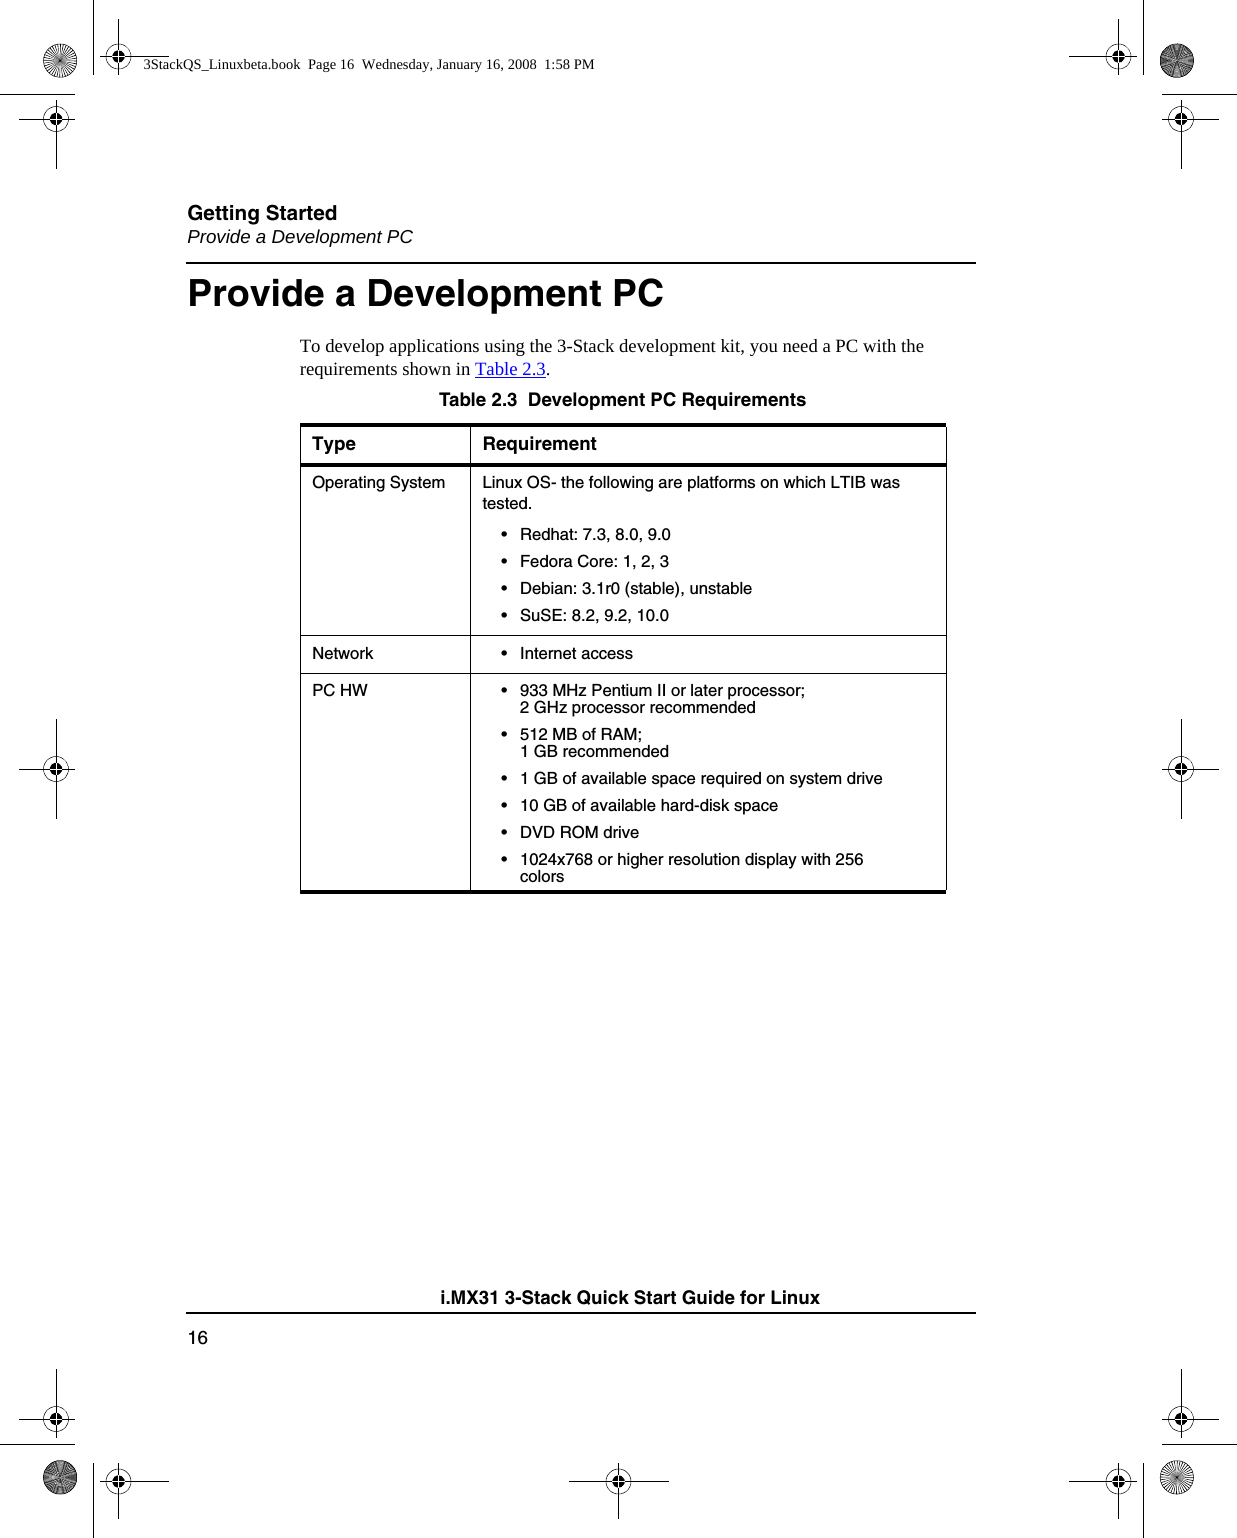 Getting StartedProvide a Development PC16i.MX31 3-Stack Quick Start Guide for LinuxProvide a Development PCTo develop applications using the 3-Stack development kit, you need a PC with the requirements shown in Table 2.3. Table 2.3  Development PC RequirementsType RequirementOperating System Linux OS- the following are platforms on which LTIB was tested.• Redhat: 7.3, 8.0, 9.0• Fedora Core: 1, 2, 3• Debian: 3.1r0 (stable), unstable• SuSE: 8.2, 9.2, 10.0 Network • Internet accessPC HW • 933 MHz Pentium II or later processor; 2 GHz processor recommended• 512 MB of RAM; 1 GB recommended• 1 GB of available space required on system drive• 10 GB of available hard-disk space•DVD ROM drive• 1024x768 or higher resolution display with 256 colors3StackQS_Linuxbeta.book  Page 16  Wednesday, January 16, 2008  1:58 PM